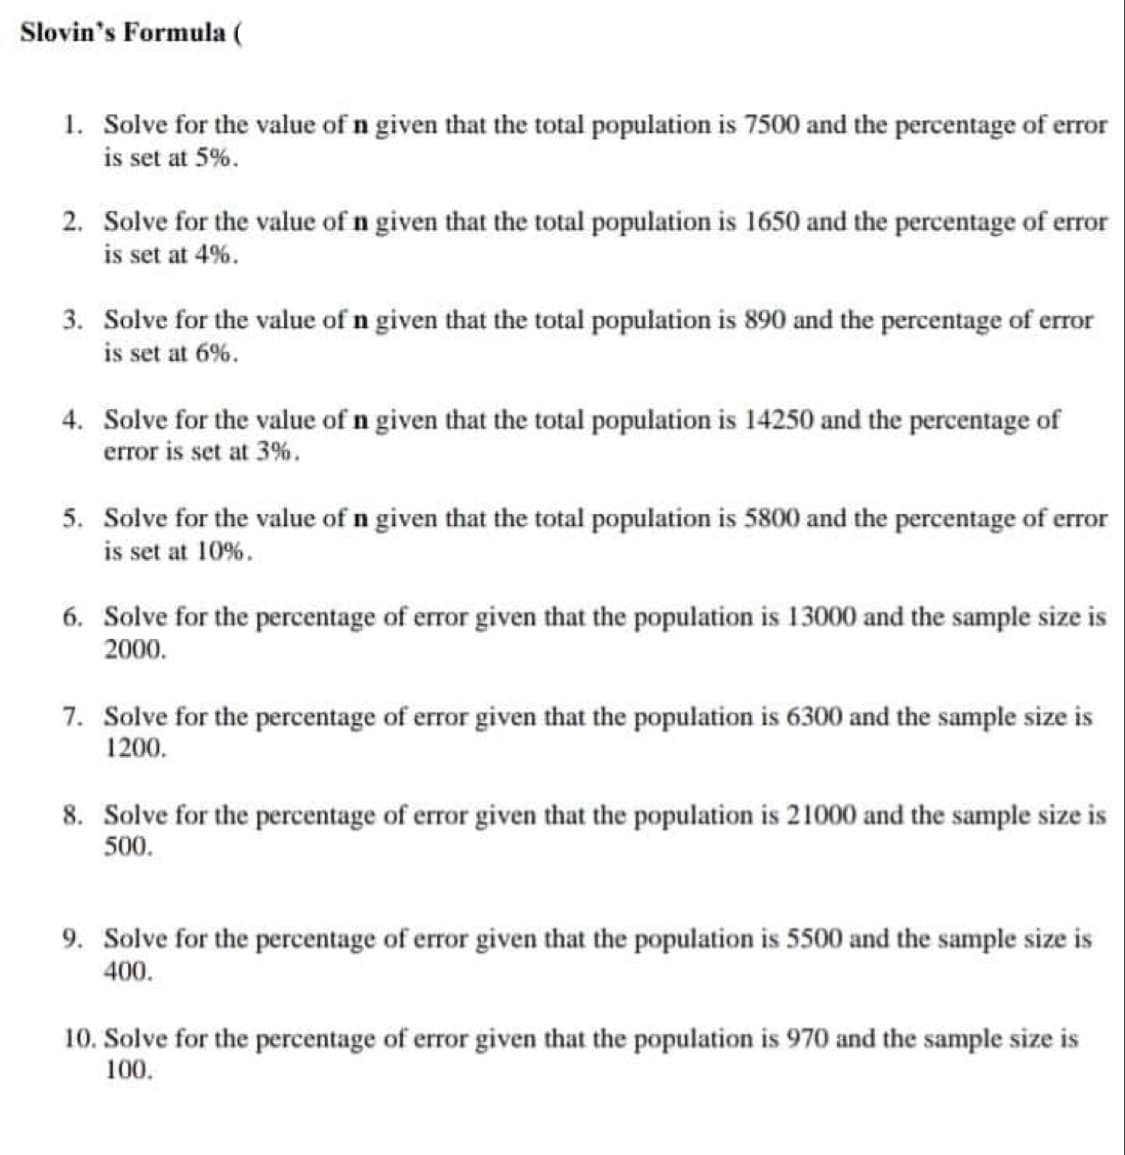 Slovin's Formula (
1. Solve for the value of n given that the total population is 7500 and the percentage of error
is set at 5%.
2. Solve for the value of n given that the total population is 1650 and the percentage of error
is set at 4%.
3. Solve for the value of n given that the total population is 890 and the percentage of error
is set at 6%.
4. Solve for the value of n given that the total population is 14250 and the percentage of
error is set at 3%.
5. Solve for the value of n given that the total population is 5800 and the percentage of error
is set at 10%.
6. Solve for the percentage of error given that the population is 13000 and the sample size is
2000.
7. Solve for the percentage of error given that the population is 6300 and the sample size is
1200.
8. Solve for the percentage of error given that the population is 21000 and the sample size is
500.
9. Solve for the percentage of error given that the population is 5500 and the sample size is
400.
10. Solve for the percentage of error given that the population is 970 and the sample size is
100.